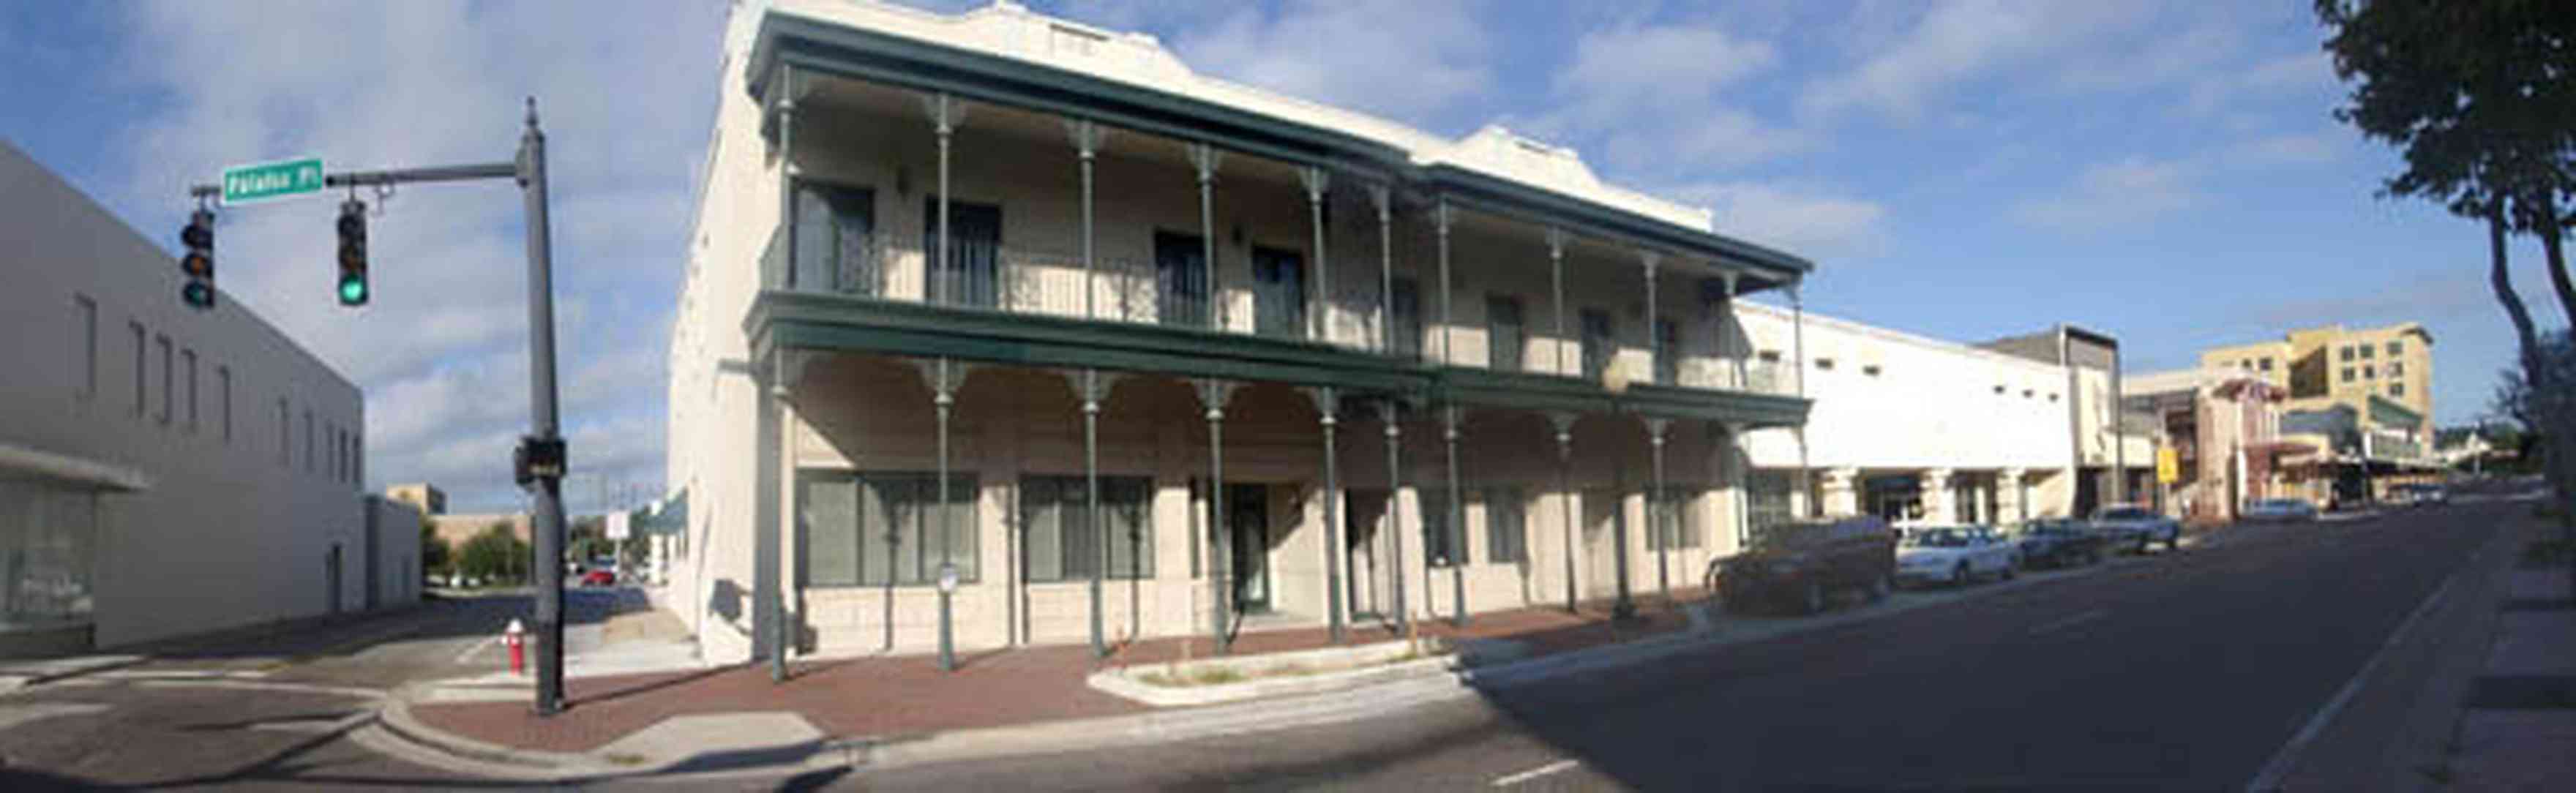 Pensacola:-Palafox-Historic-District:-Linne-Building_01.jpg:  wrought iron gallery, historic district, two-lane street